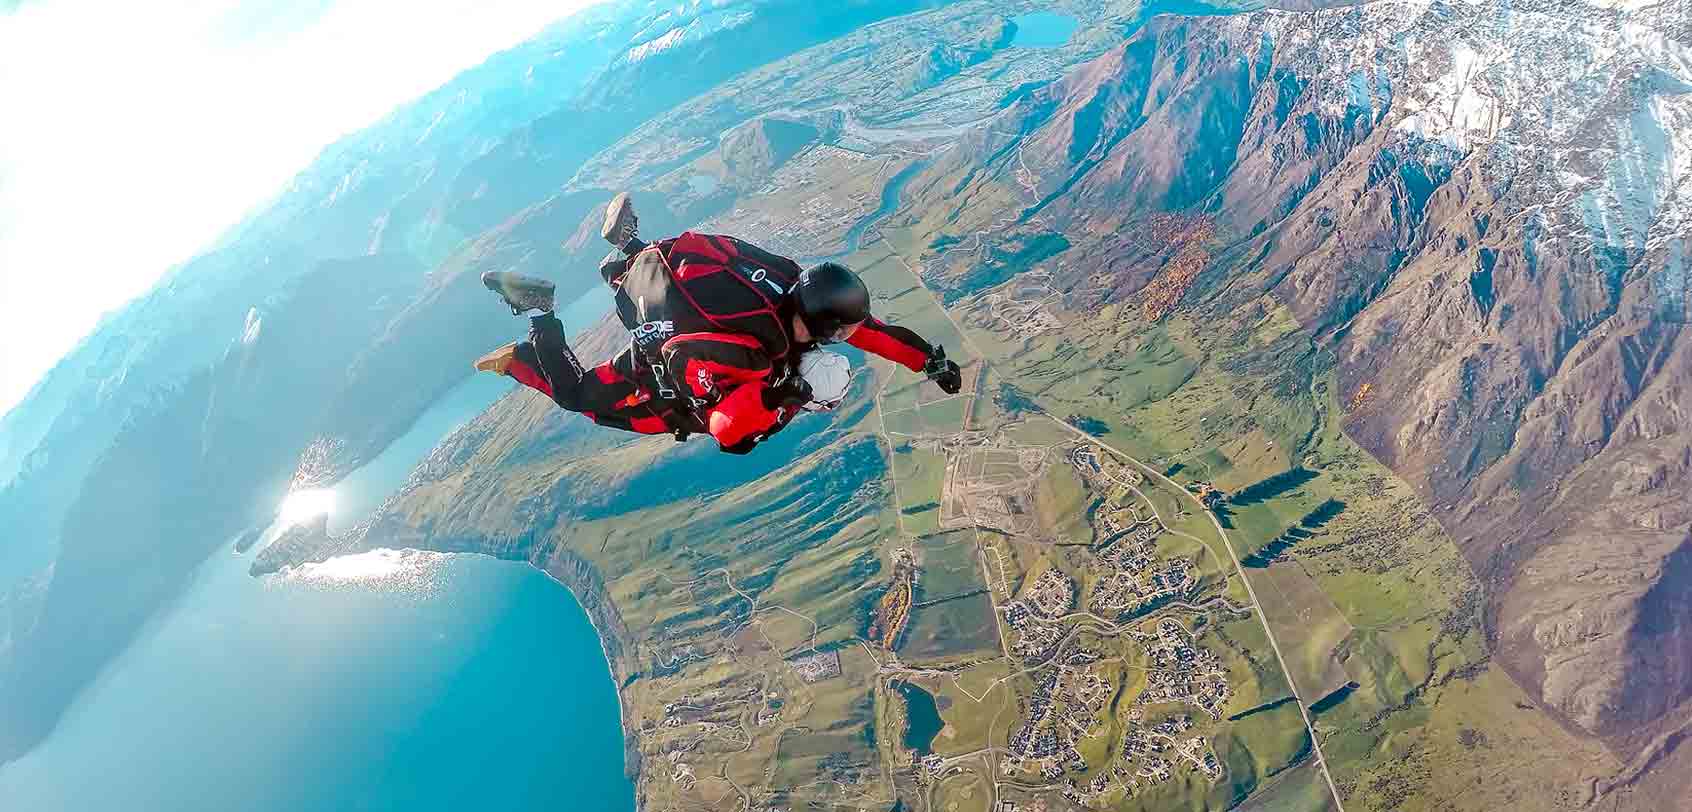 Things to Do in South Island: Sky diving